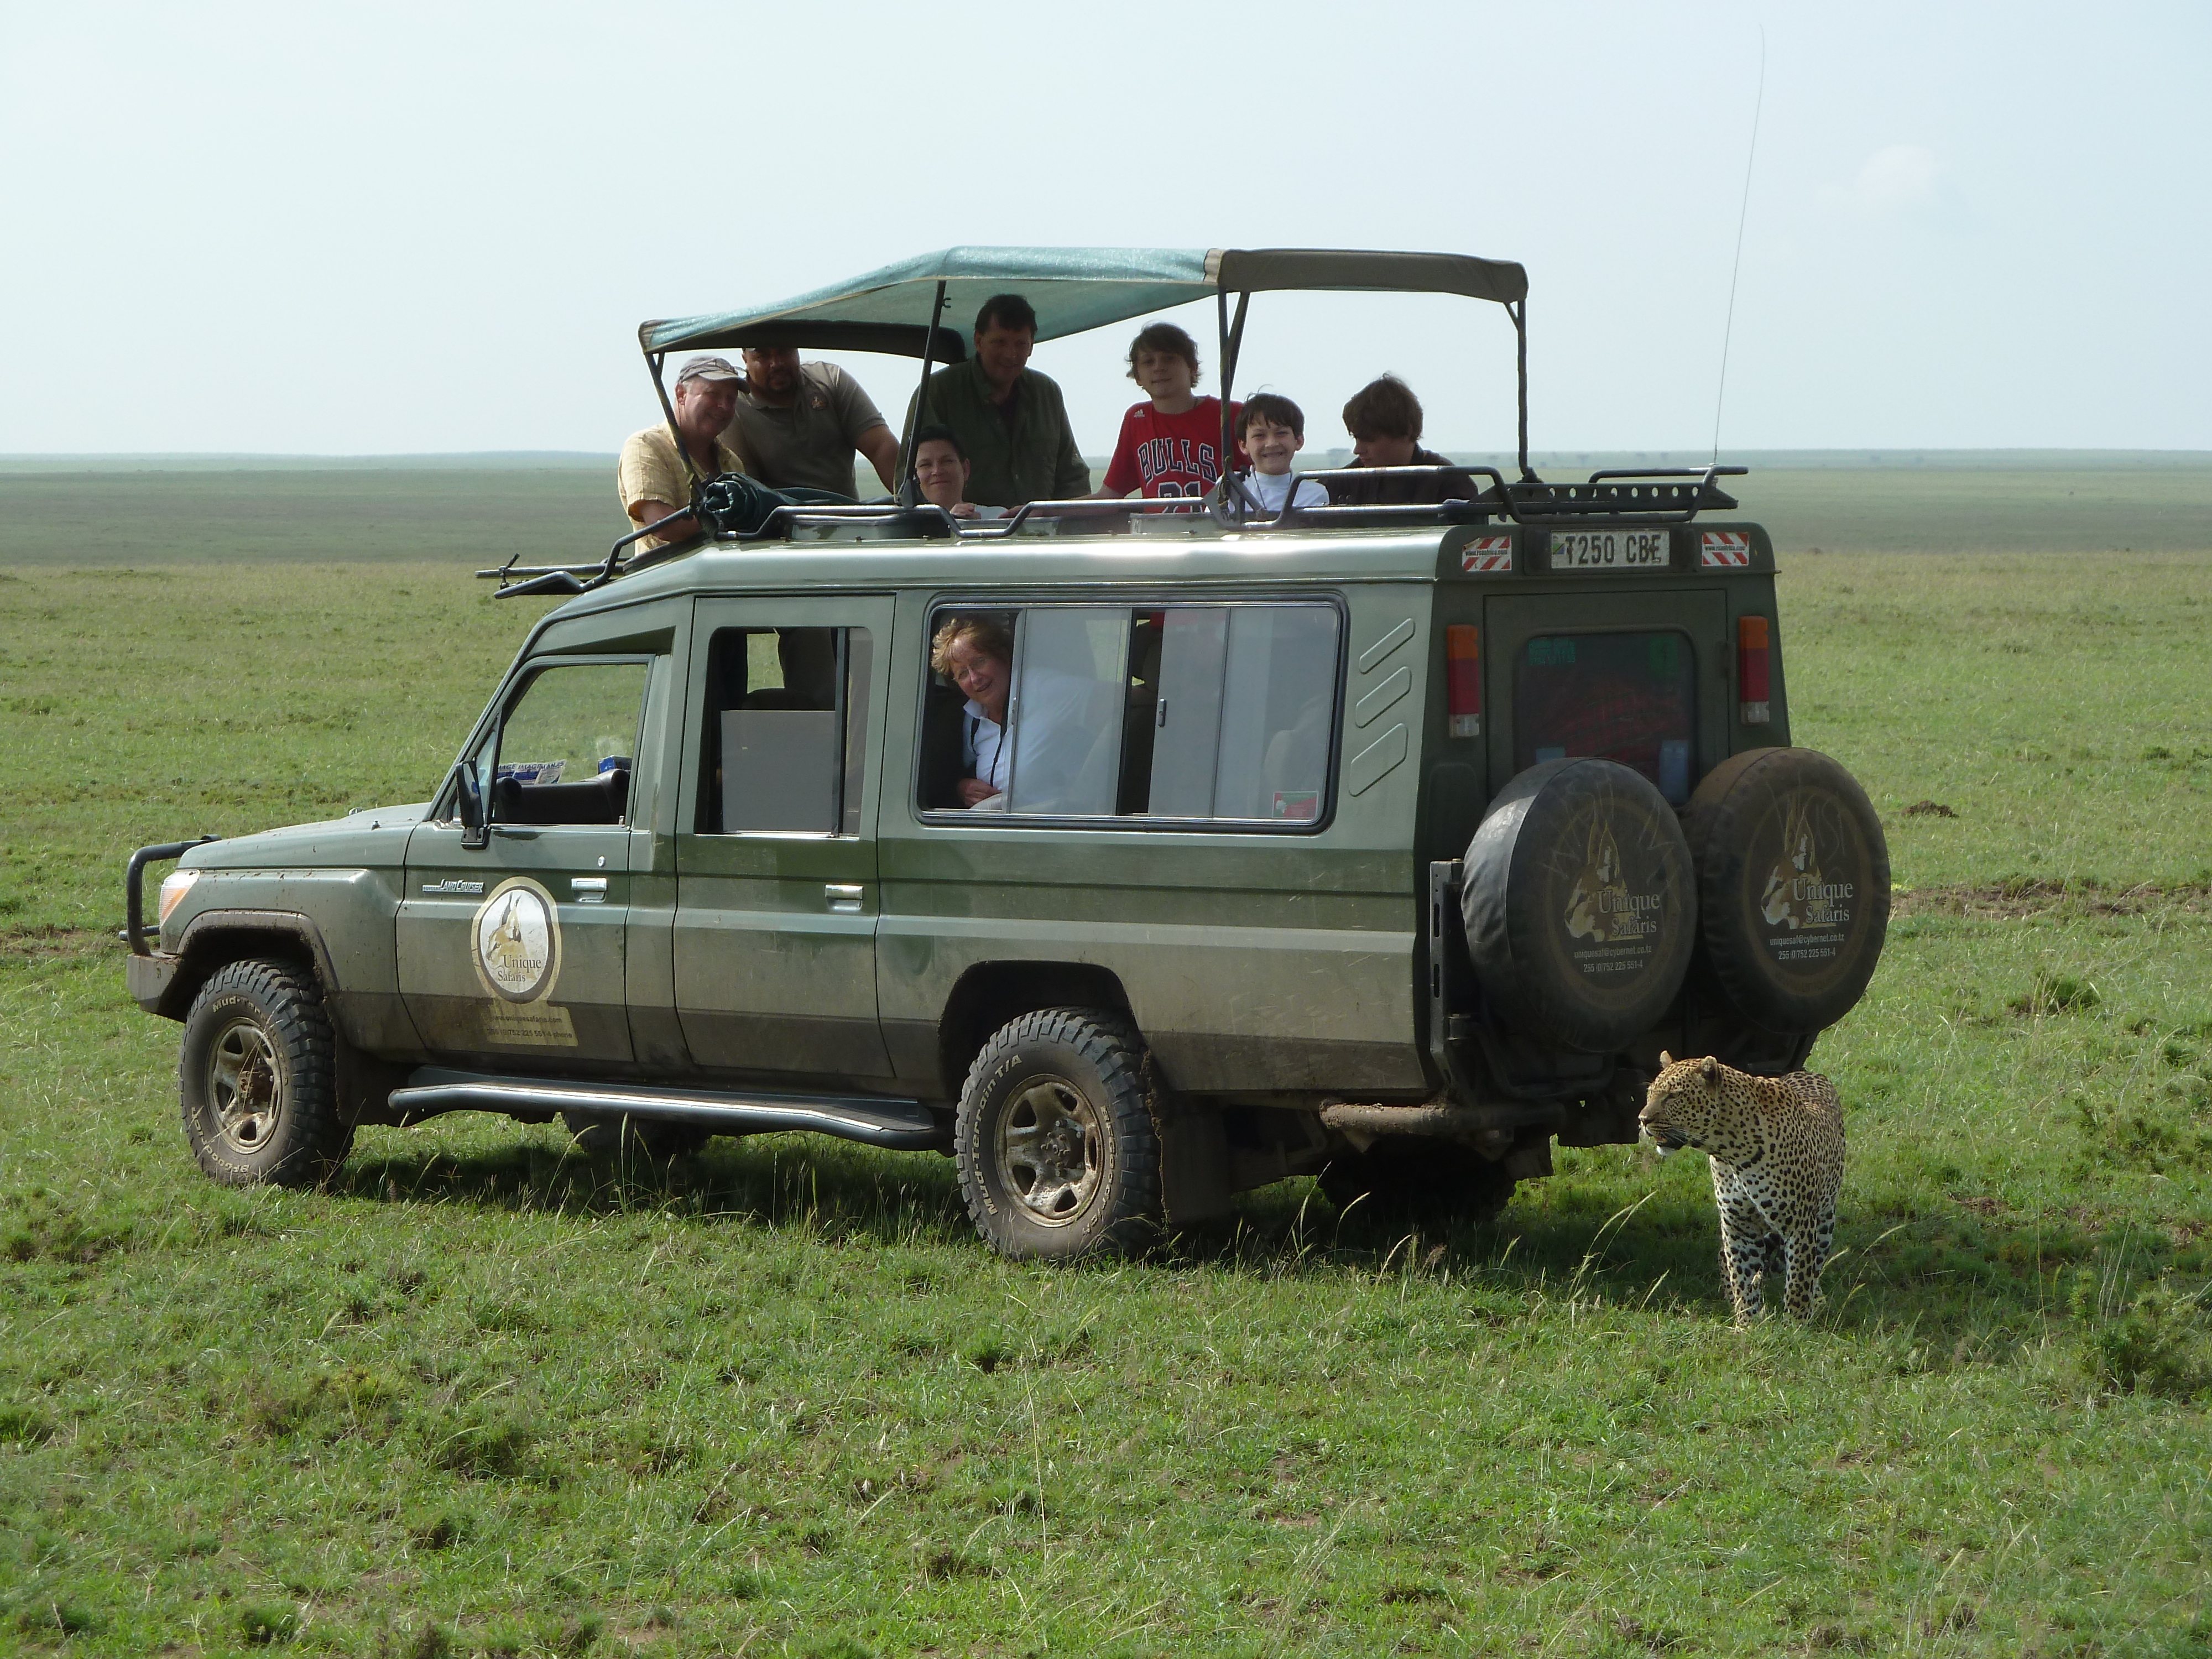 Leading a tour in Serengeti National Park, Tanzania in 2014. That’s Arnold Mushi of Unique Safaris next to Bill, and the Crawford family of Lake Forest. Courtesy of Mary Anne Rogers.